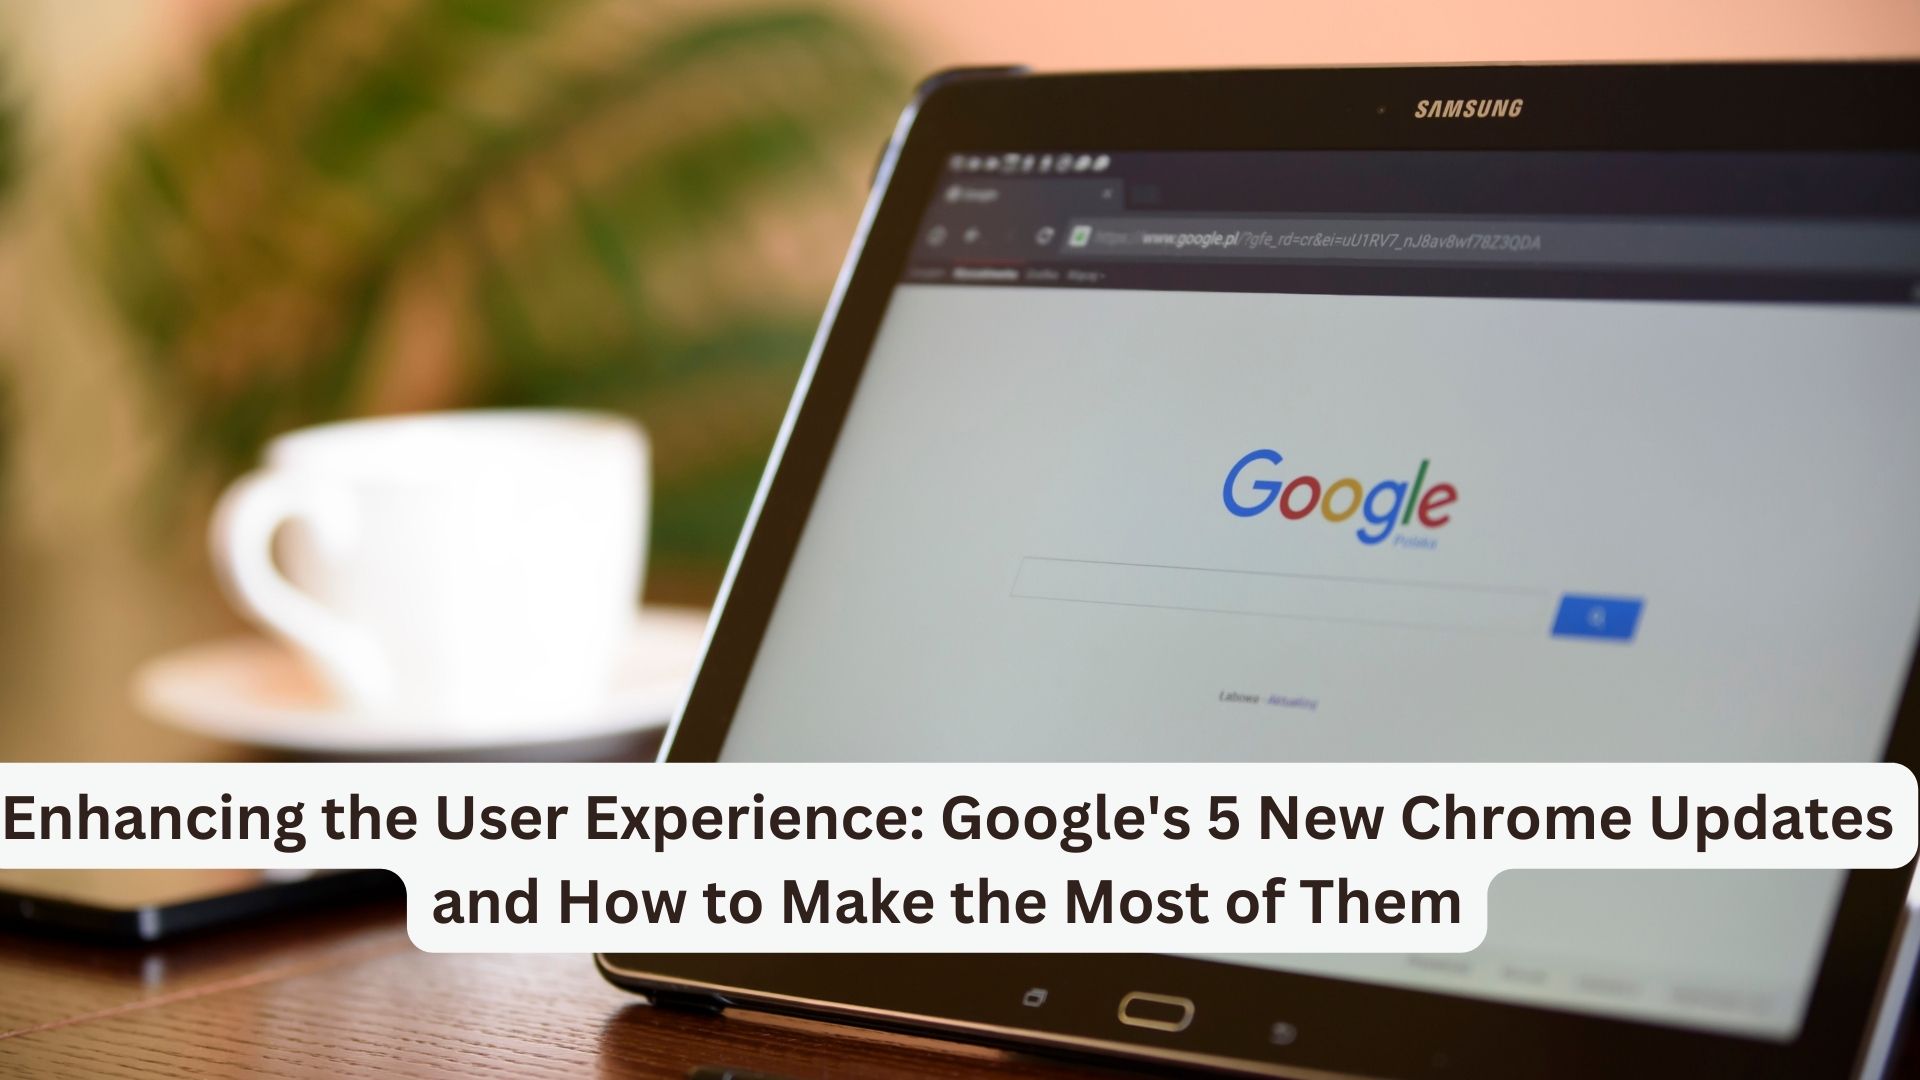 Enhancing the User Experience: Google's 5 New Chrome Updates and How to Make the Most of Them